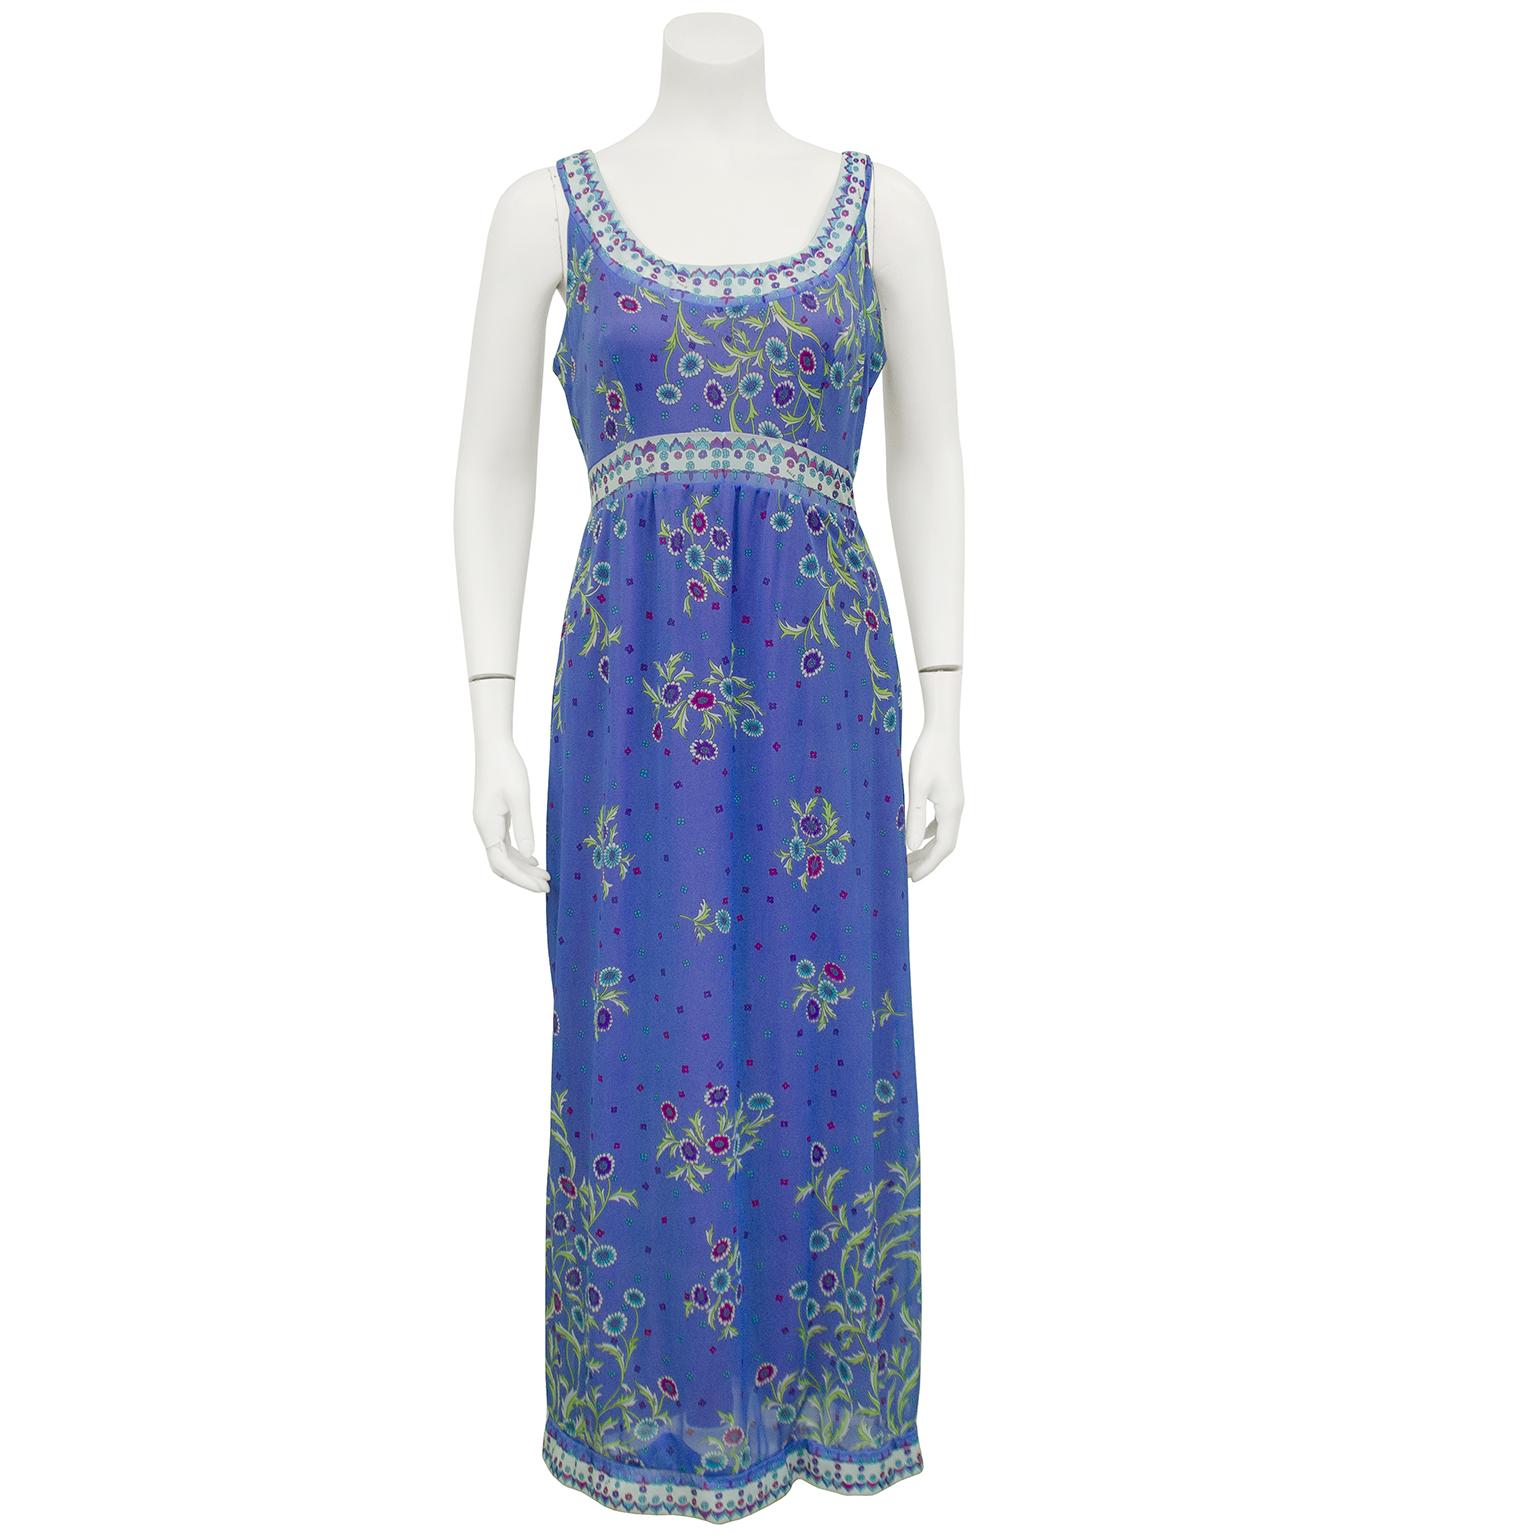 Emilio Pucci for Formfit Rogers maxi dress with matching kimono style jacket. Both pieces are made from printed nylon with a flower motif on a purple background. The dress is accented at the empire bust, hemline and neckline with a white floral